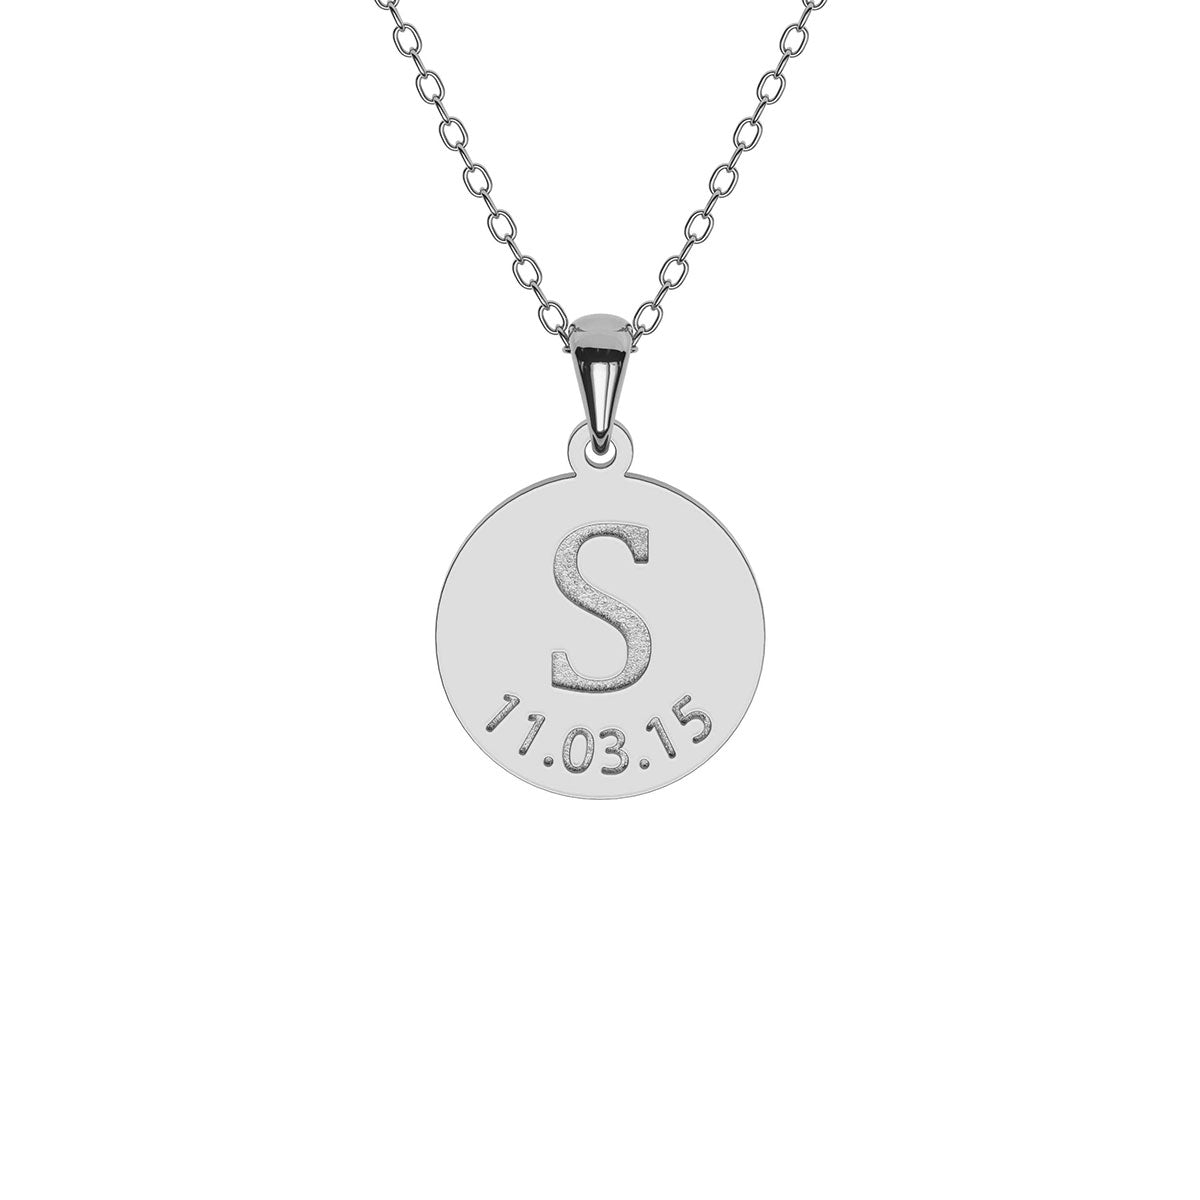 Personalized Initial Disc Necklace with Date Engraving